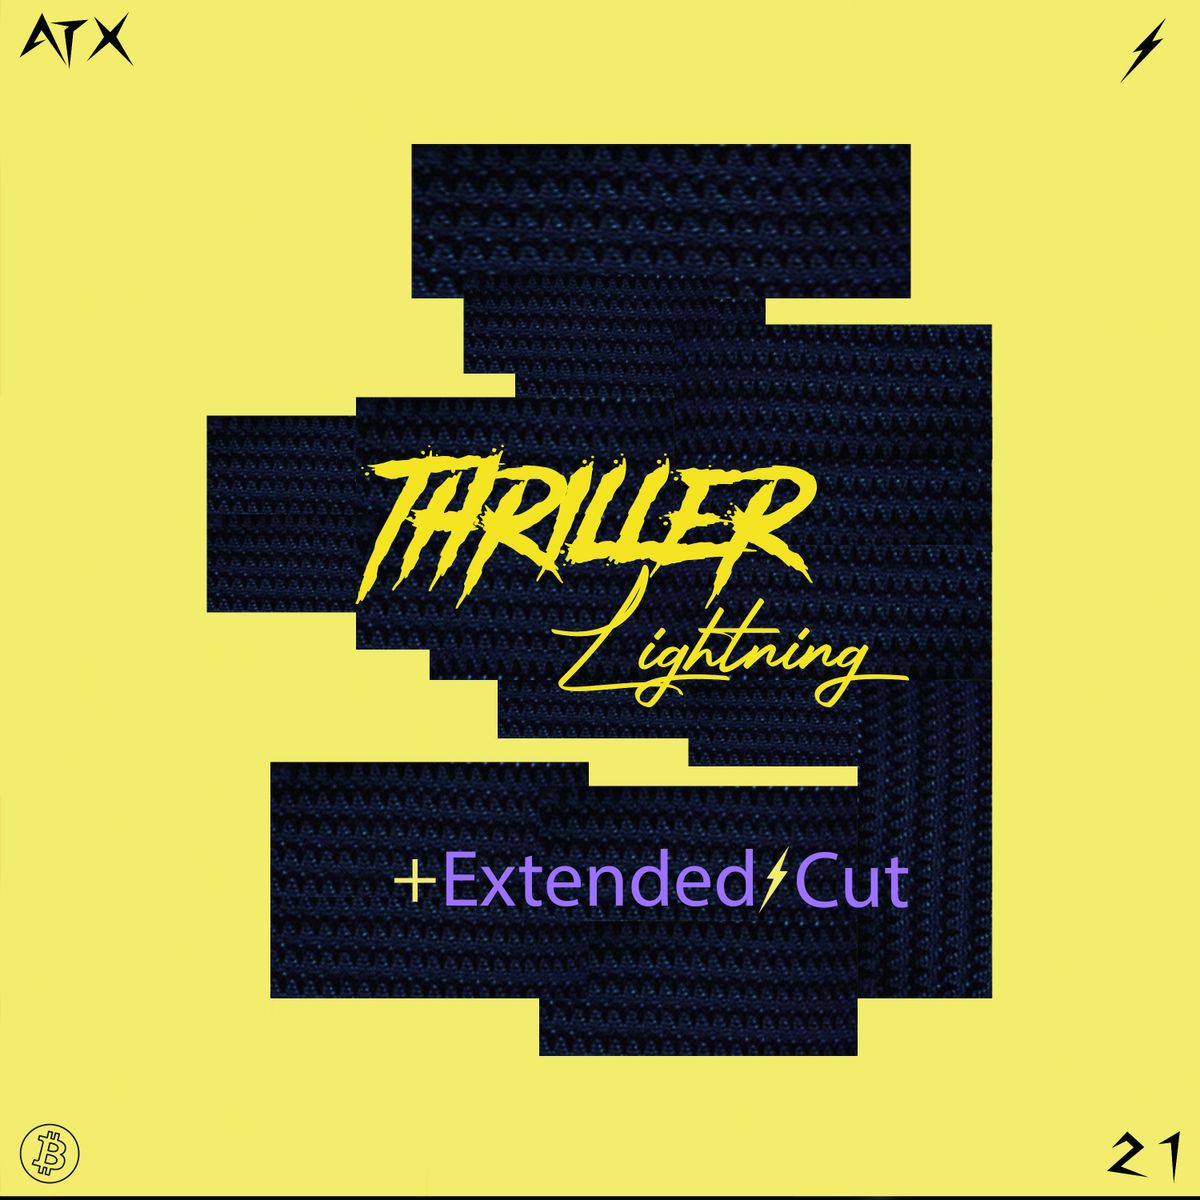 🎧 Thriller Lightning + Extended⚡Cut: Oshi Founder Michael Atwood